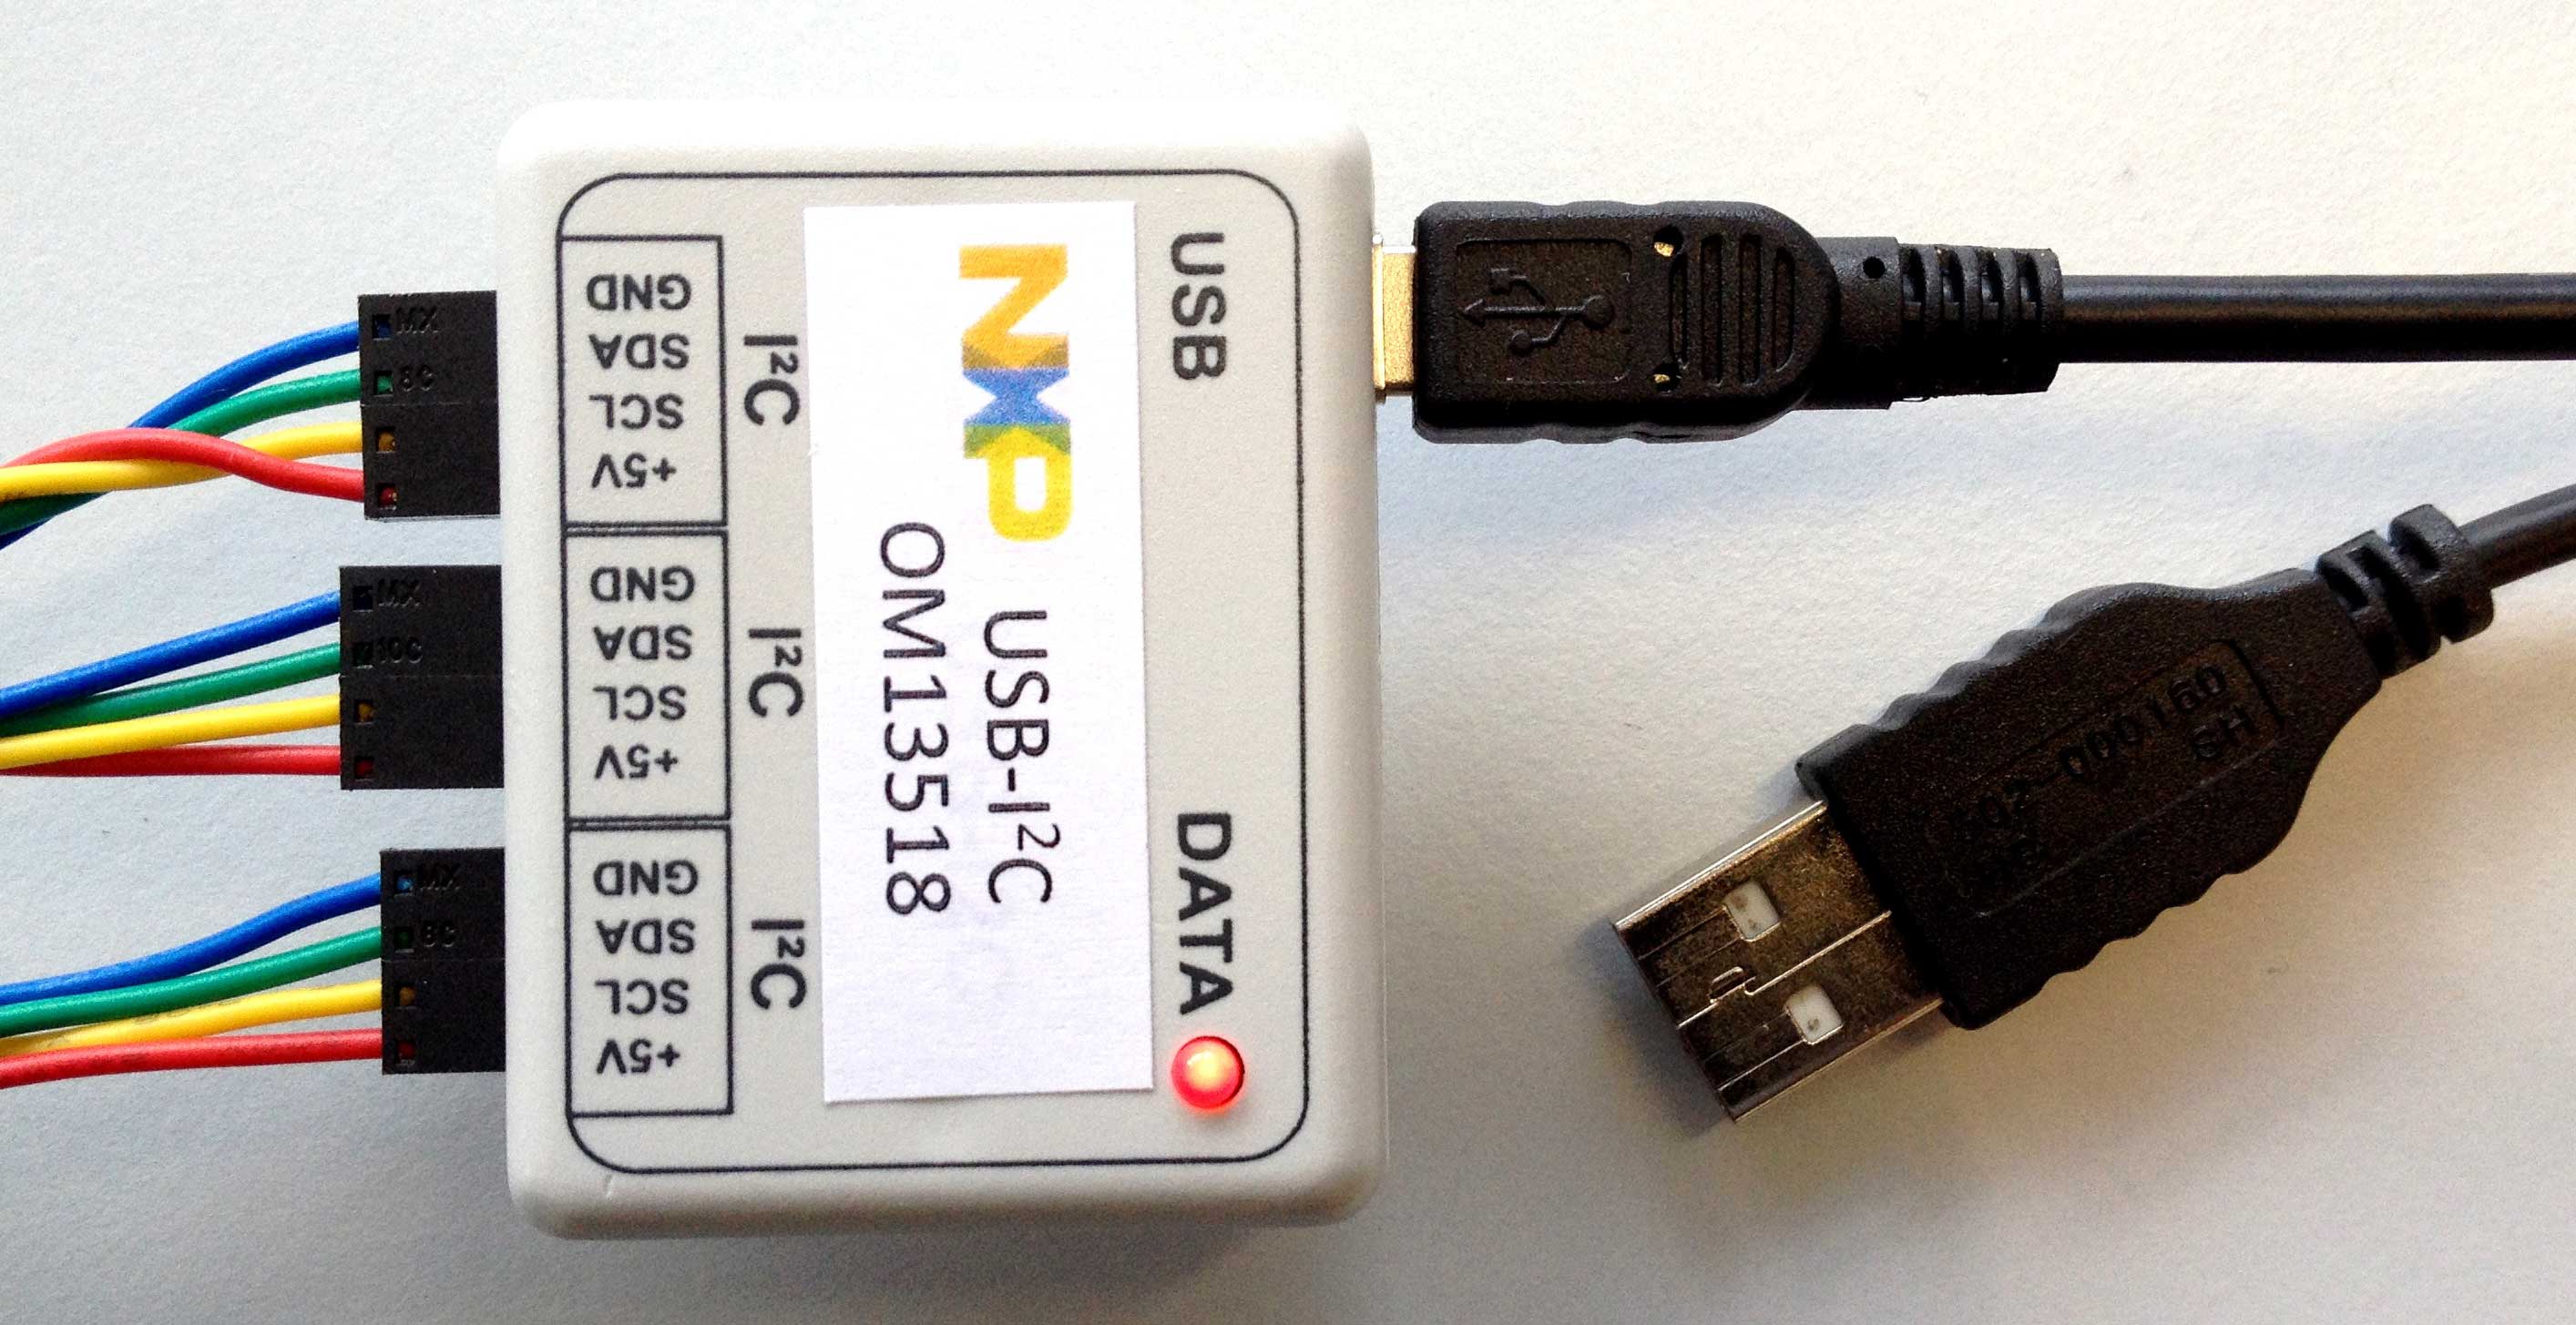 Universal USB-I²C-bus interface dongle OM13518 with a GUI for the RTCs PCF85263 and PCF85363